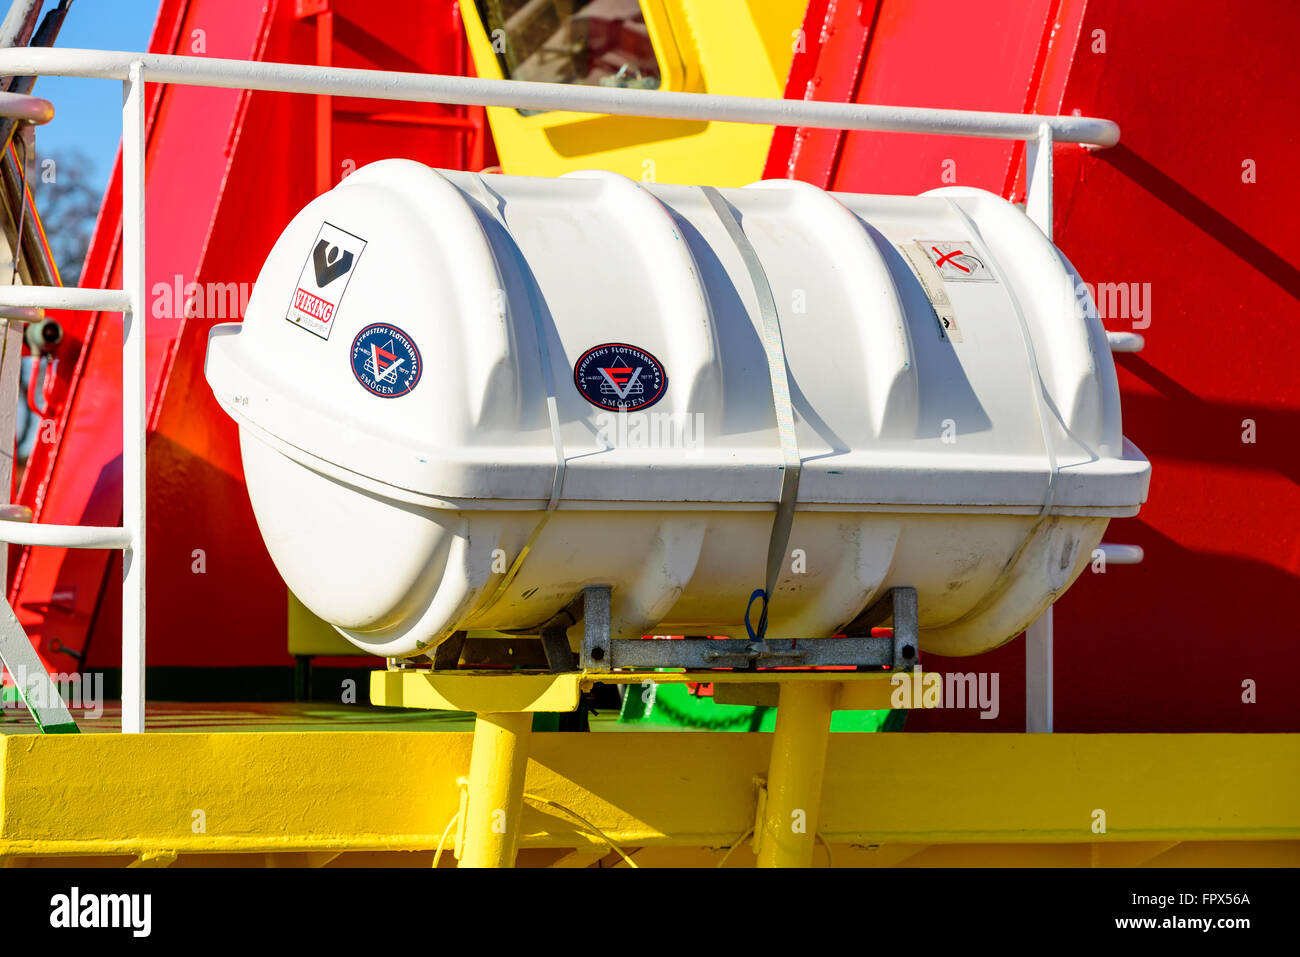 Kalmar, Sweden - March 17, 2016: An inflatable life raft at the side of a rescue ship. This type of safety equipment is mandator Stock Photo